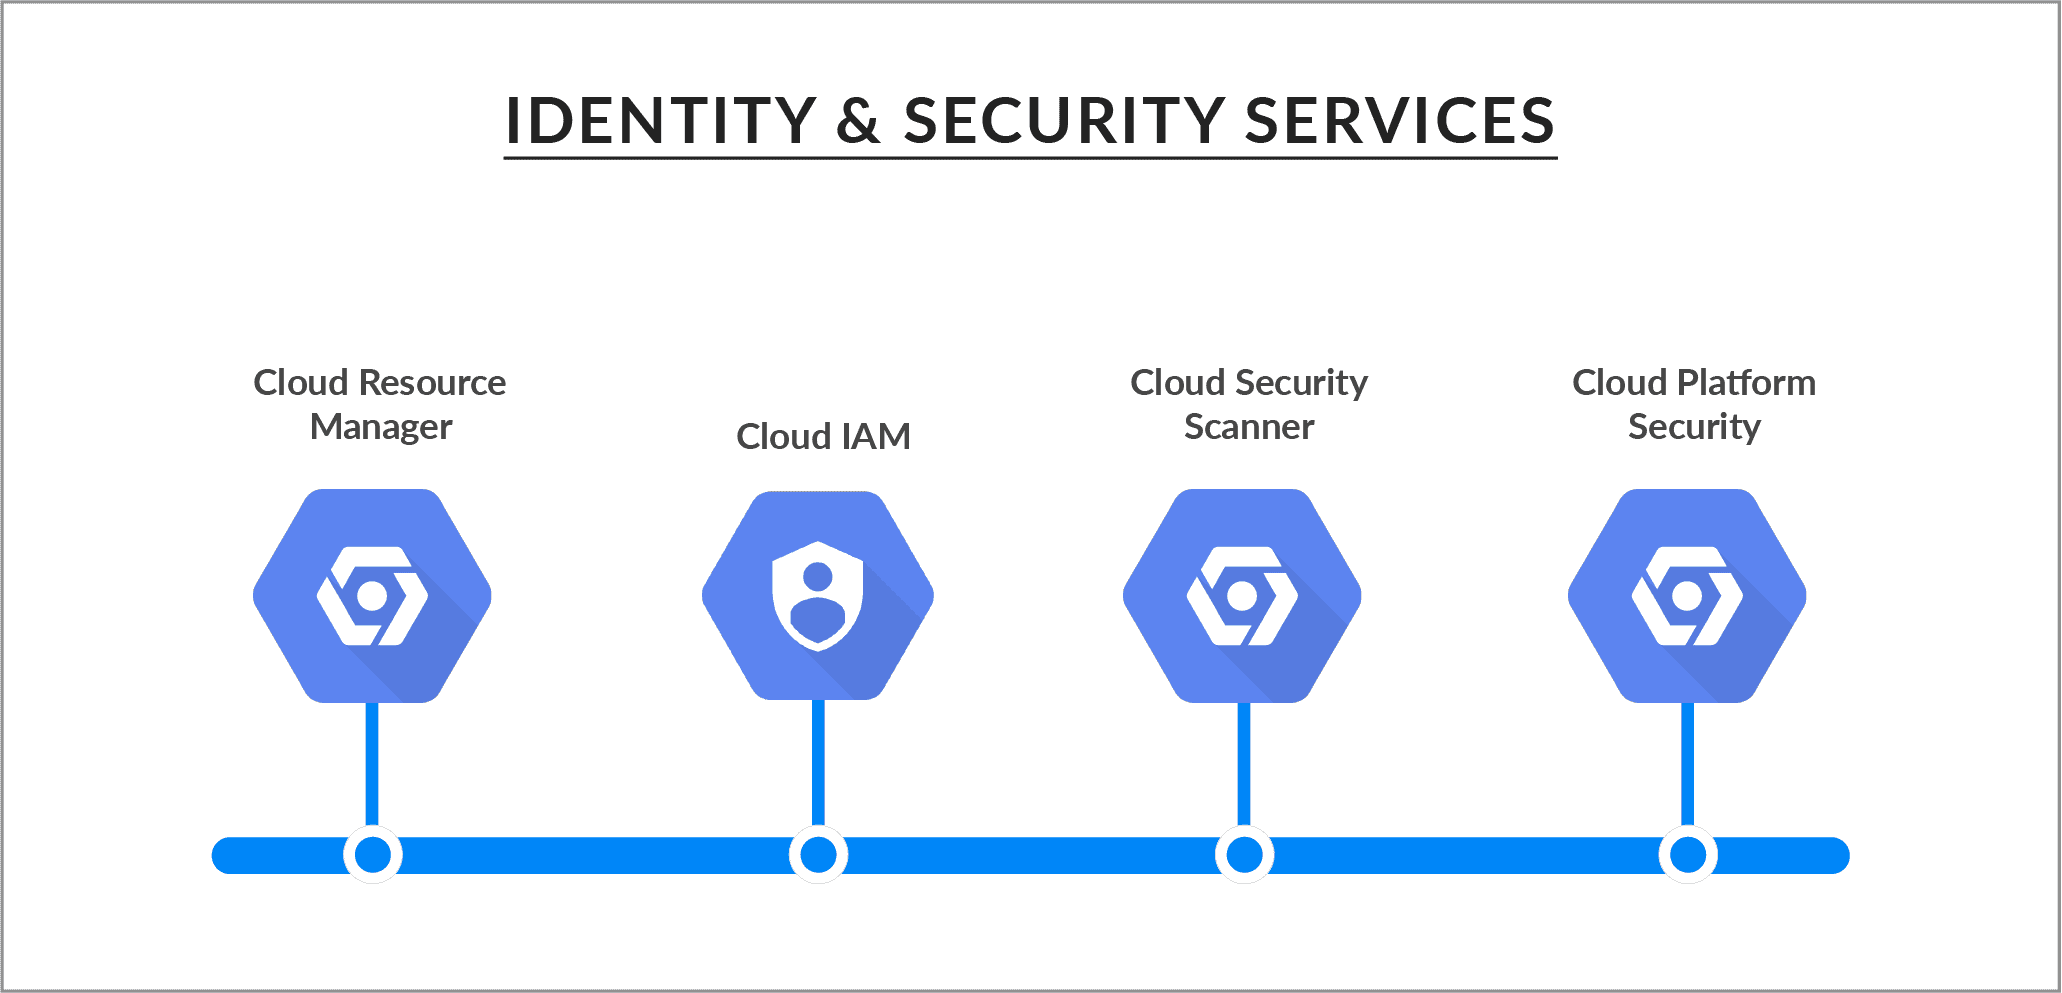 Google Cloud Services_Identity & Security